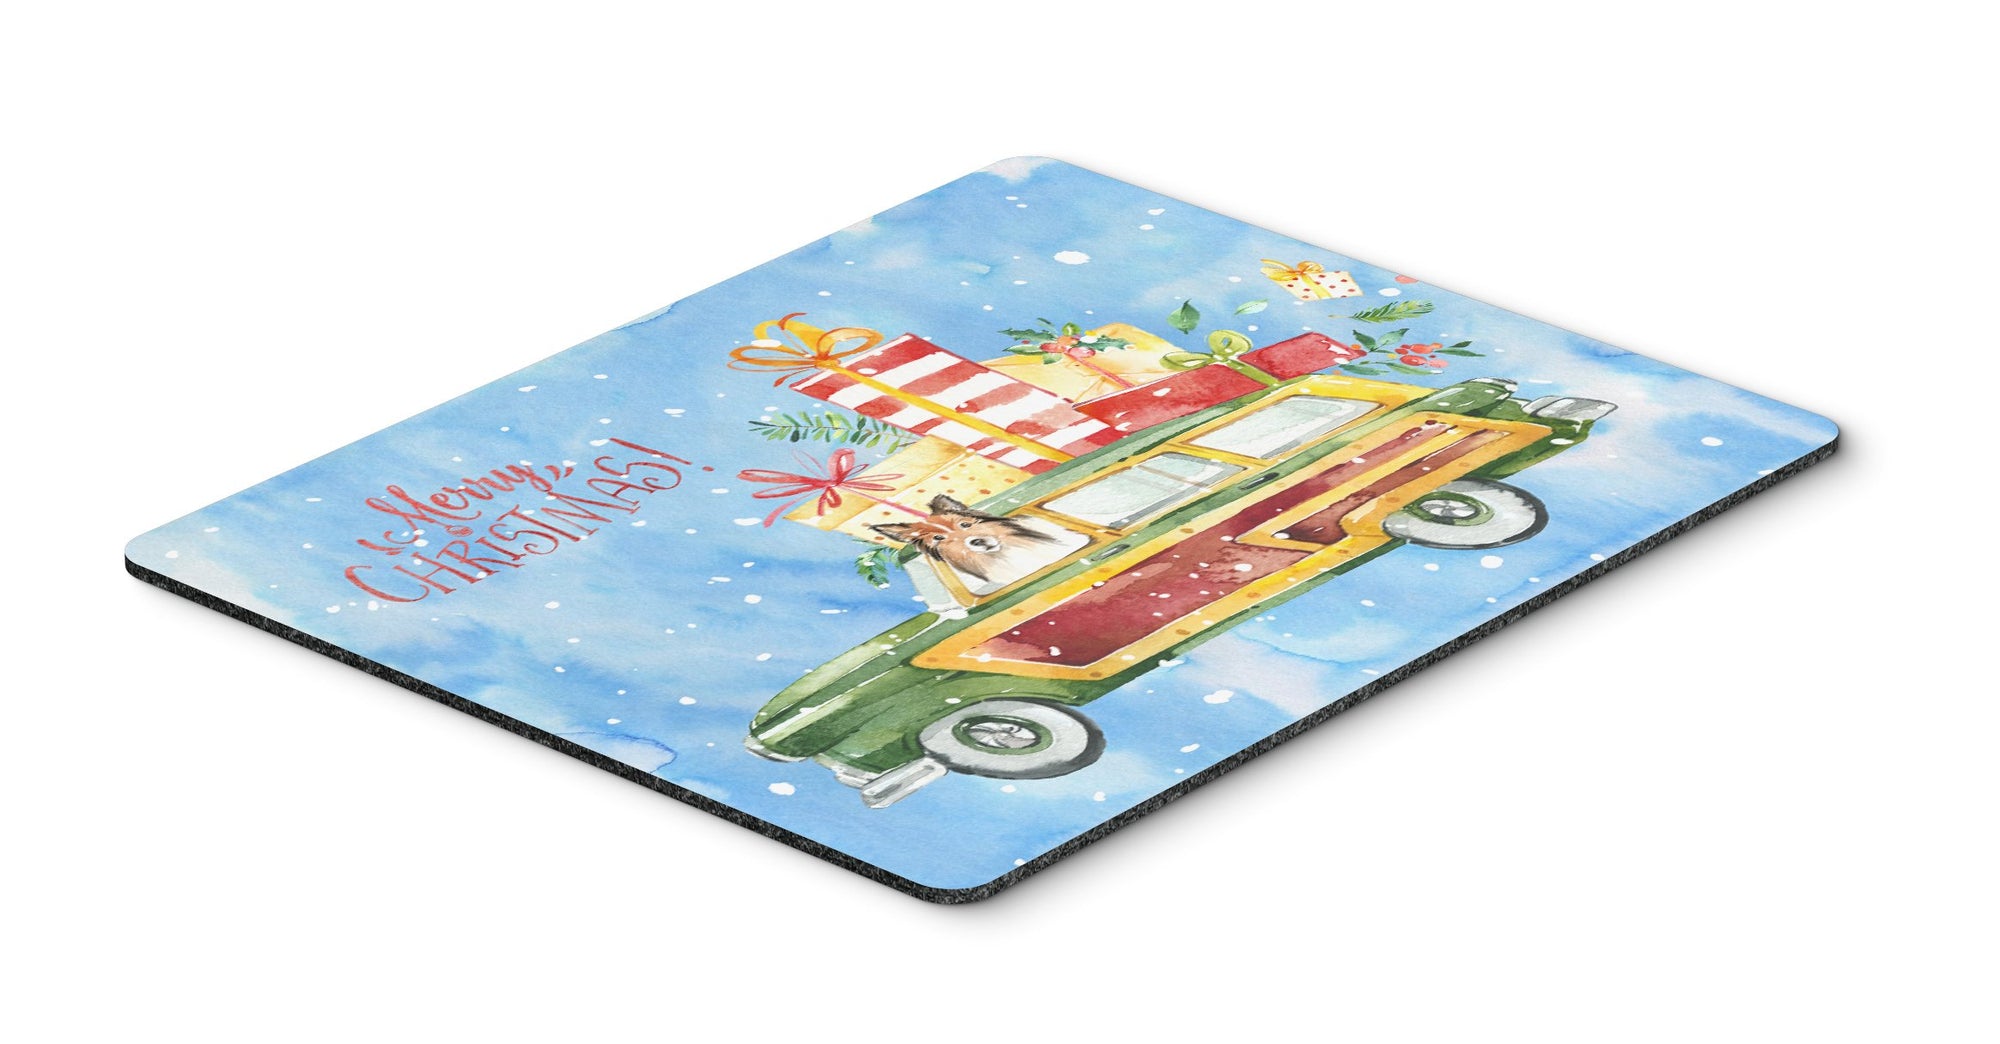 Merry Christmas Sheltie Mouse Pad, Hot Pad or Trivet CK2421MP by Caroline's Treasures